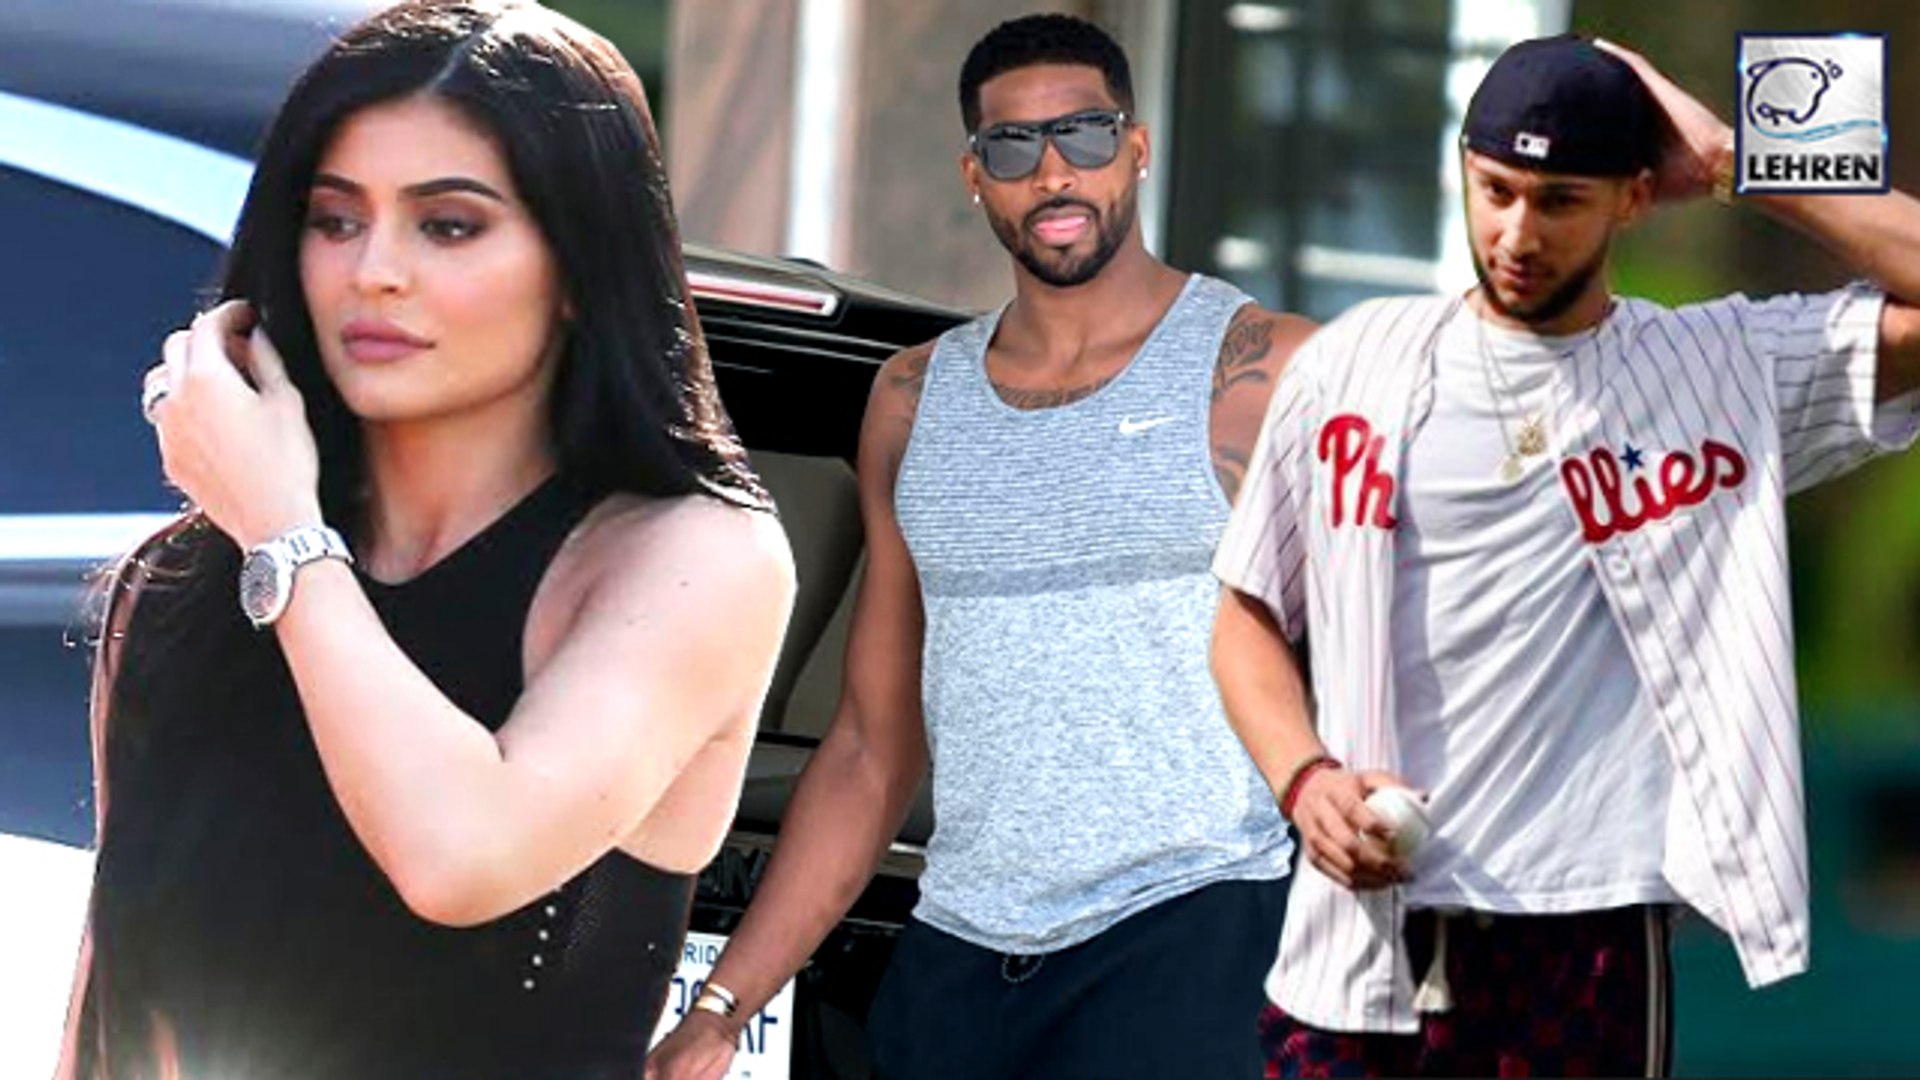 How Kylie Jenner Avoided Running Into Khloe & Kendall’s Exes Tristan Thompson & Ben Simmons